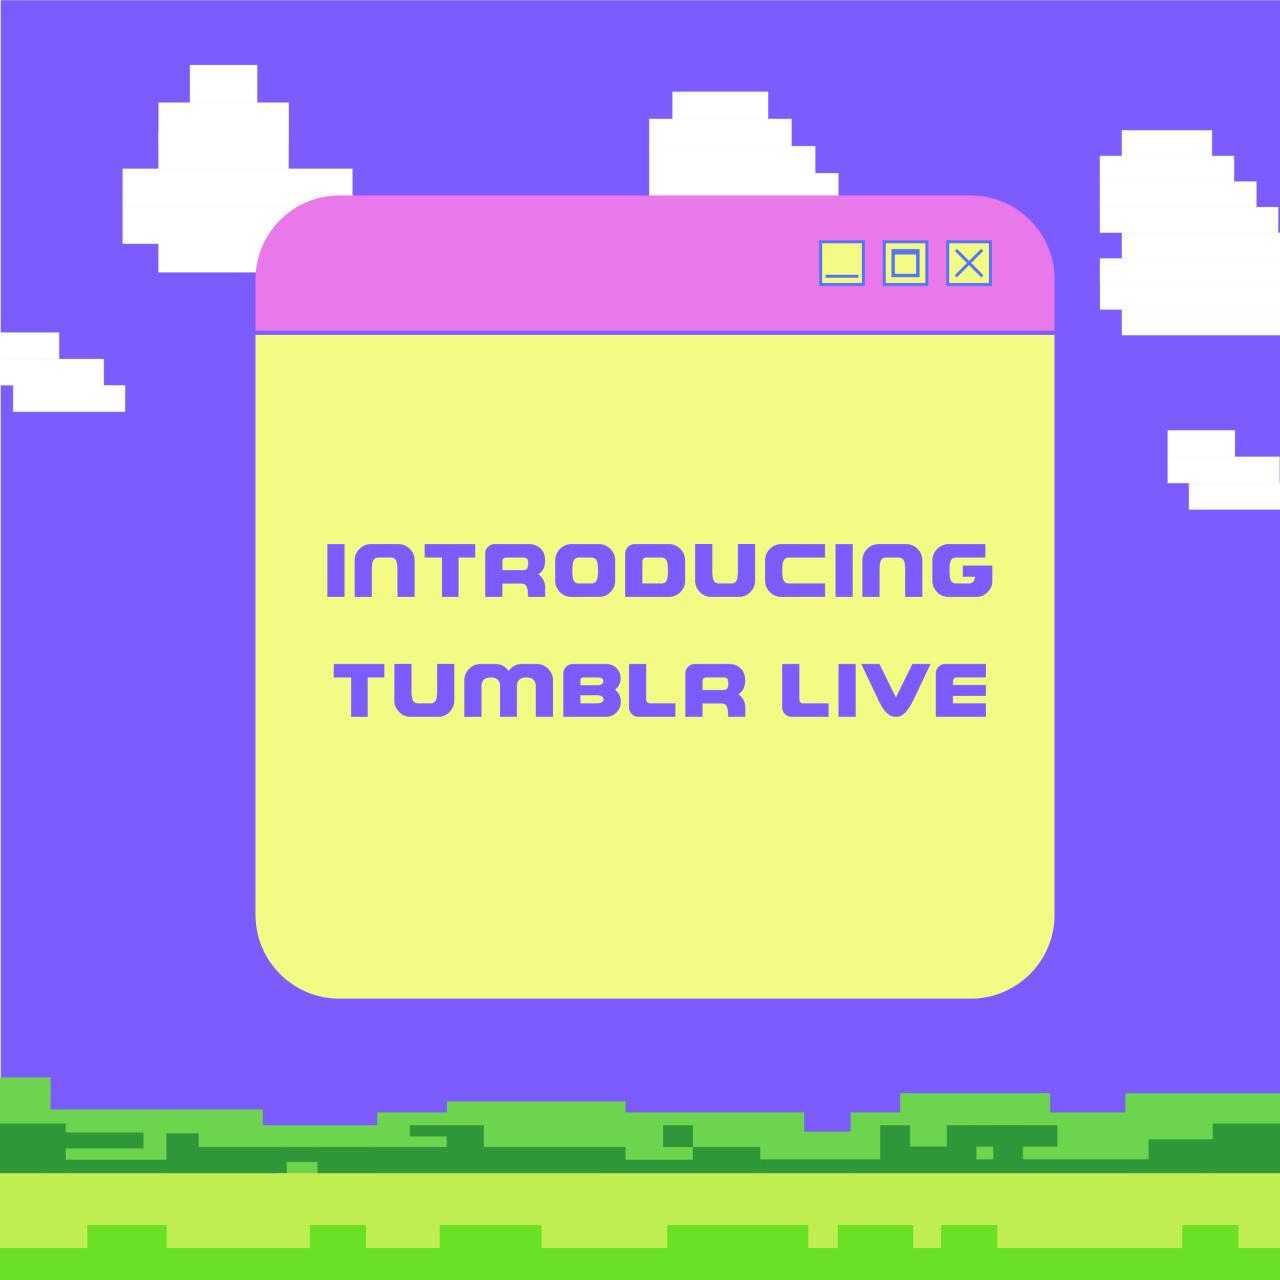 staff:
“Hello, Tumblr. Tumblr here. We’re launching live streaming on Tumblr, and we’re calling it…well, Tumblr Live.
Tumblr Live brings streaming directly to the dashboard, meaning your Tumblr audience and your streaming audience can converge....